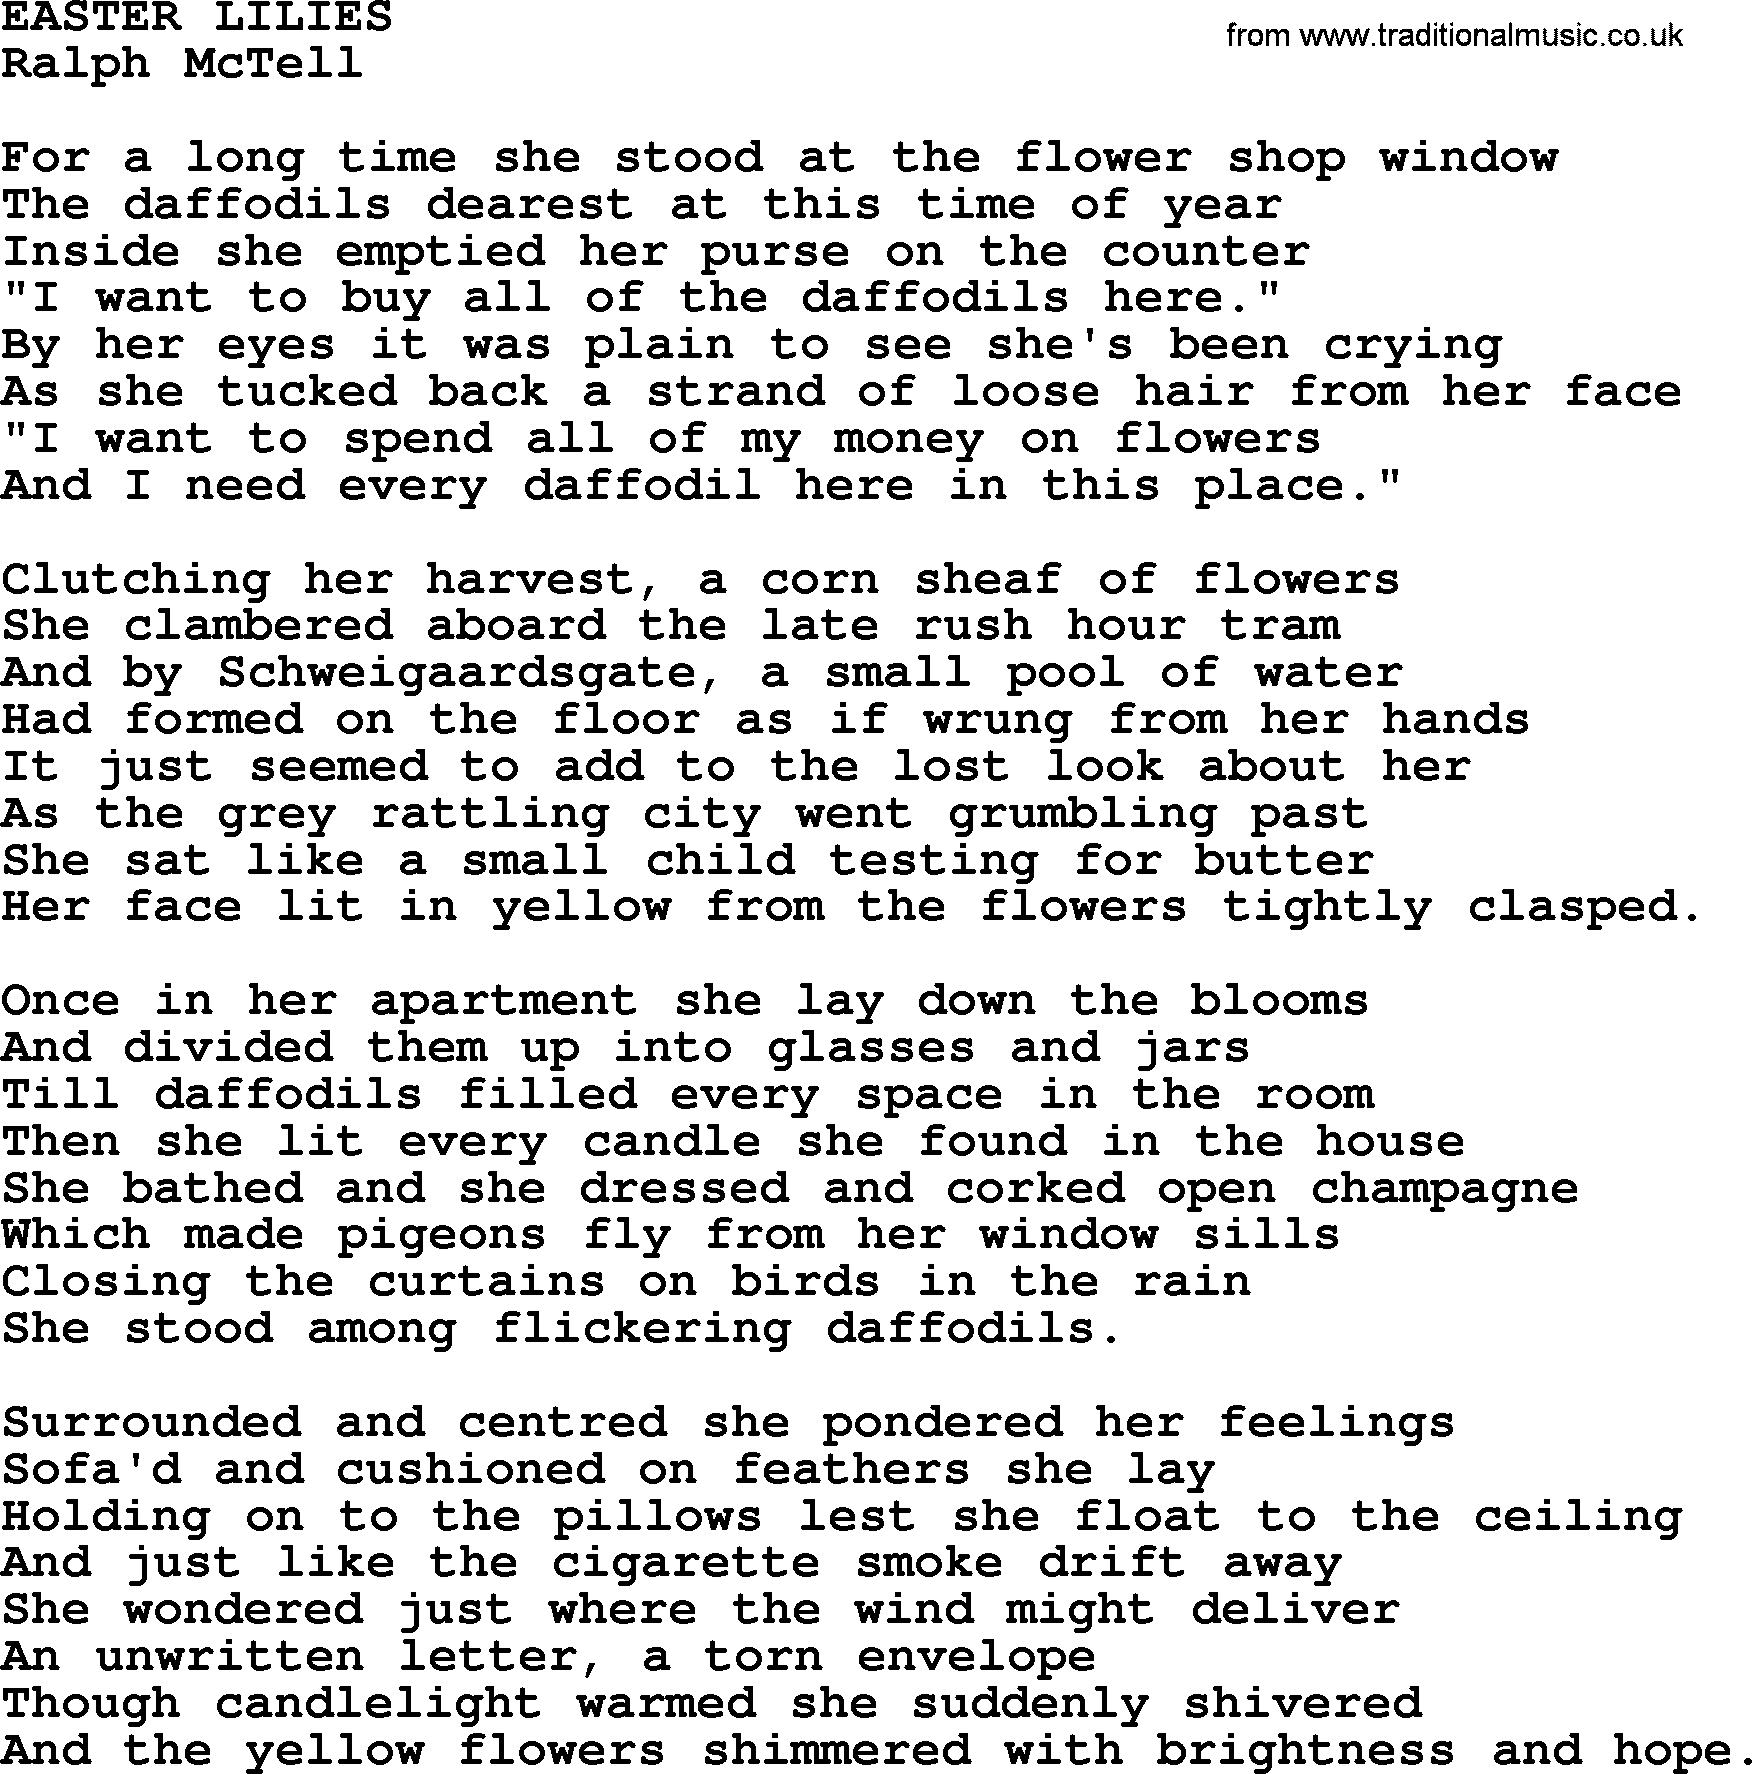 Easter Lilies Txt By Ralph Mctell Lyrics And Chords